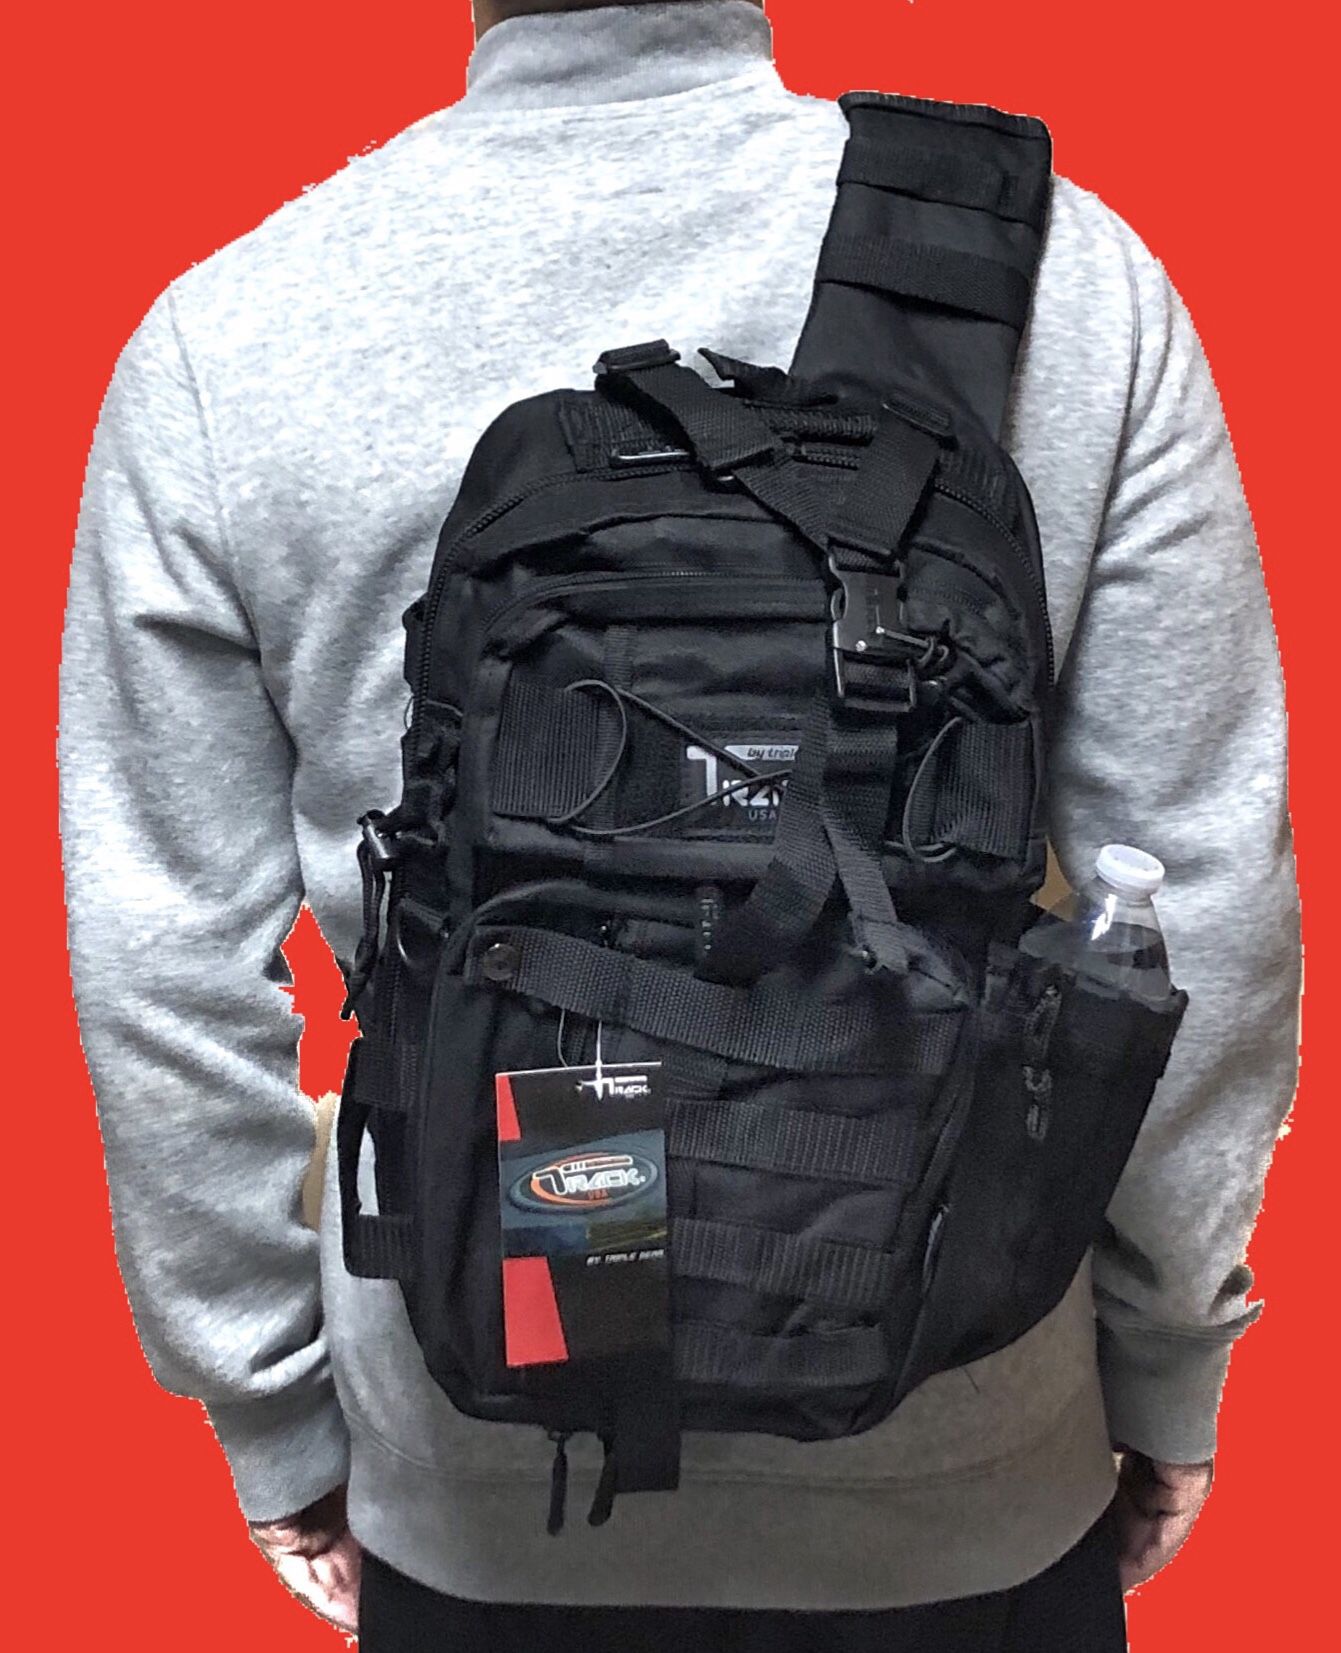 WATERFLY Crossbody Sling Backpack Sling Bag Travel/Hiking/Chest Bag/Daypack  for Sale in Anaheim, CA - OfferUp